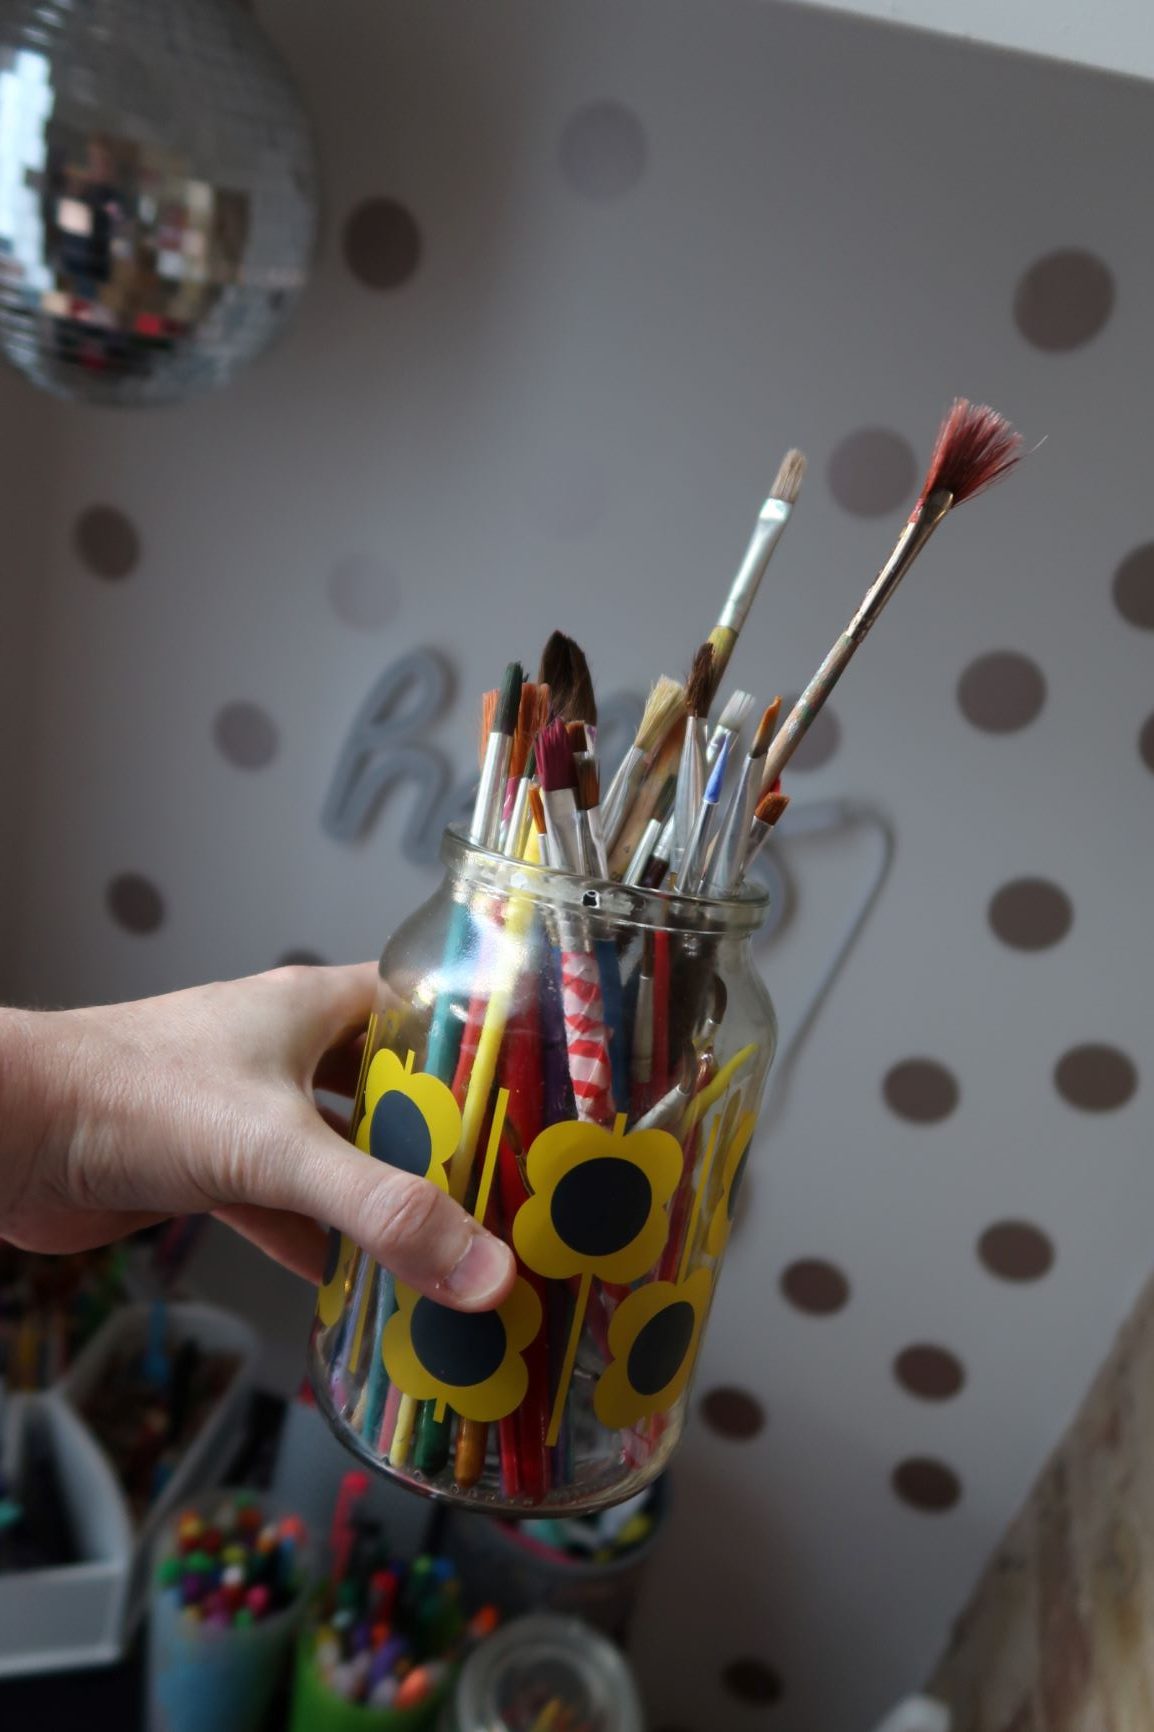 Art and Crafts area supplies - using a old coffee jar